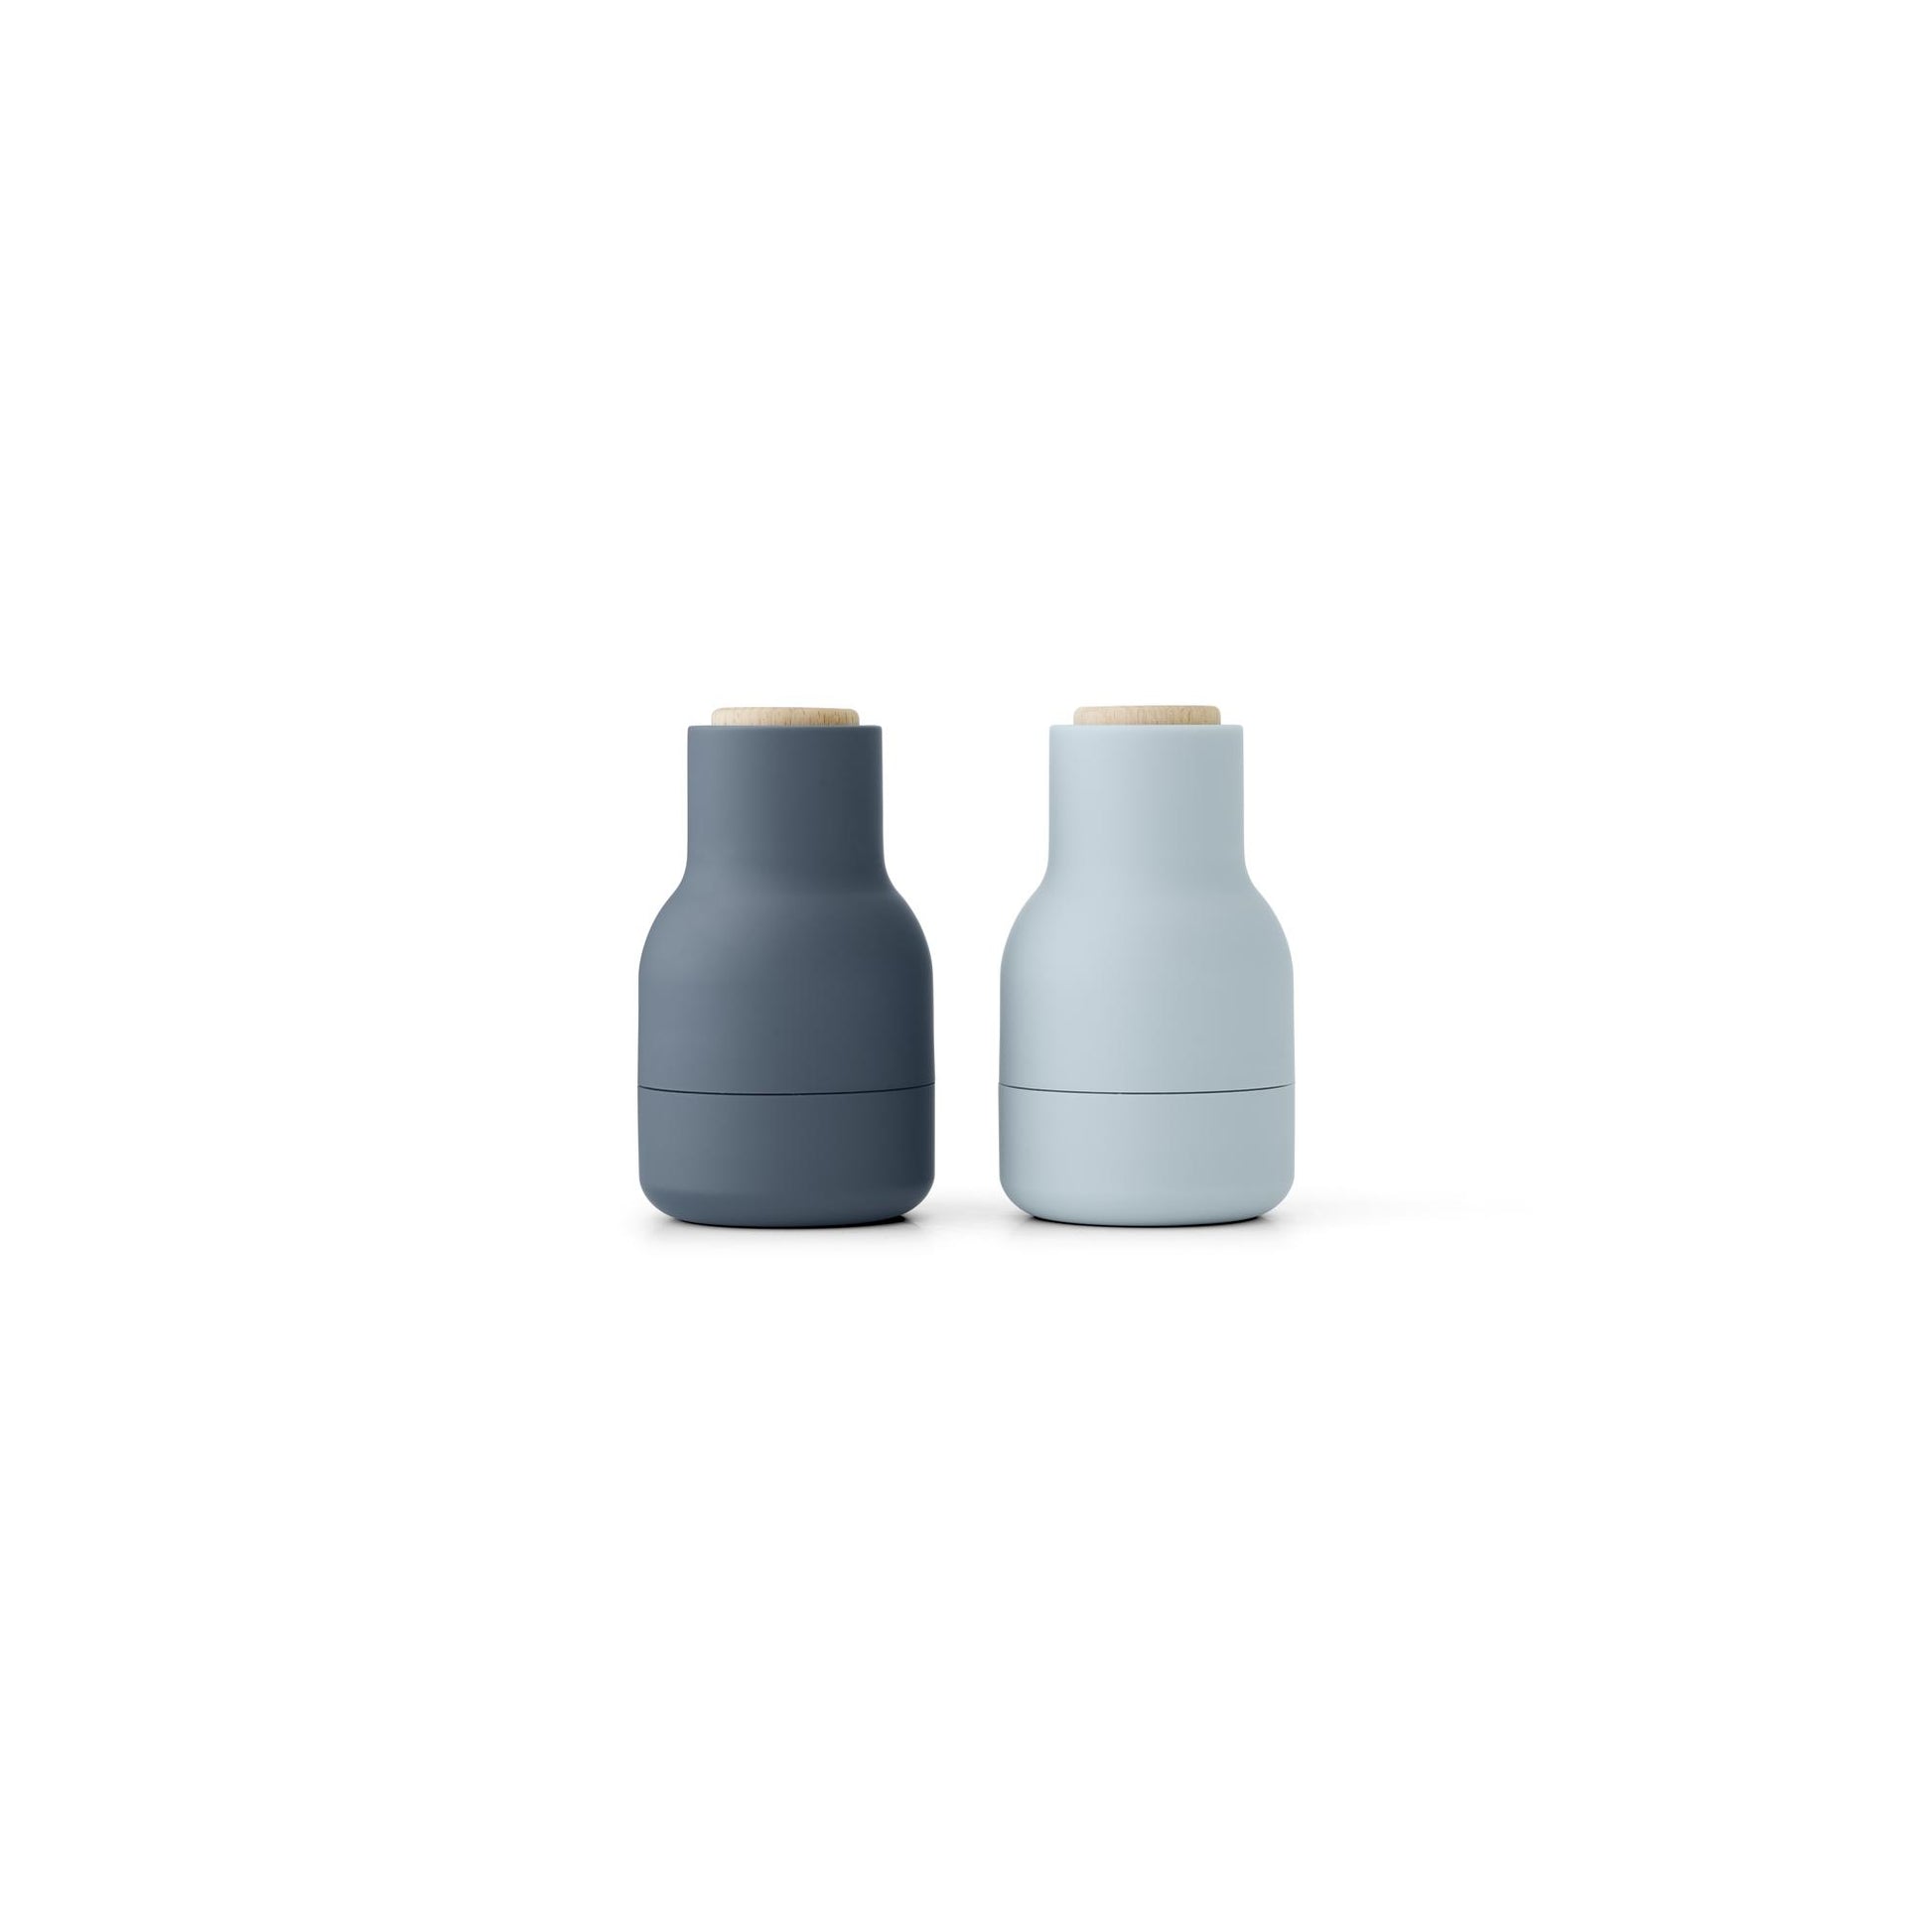 Bottle Grinder Small Set of 2 by Audo #Blues/Beech